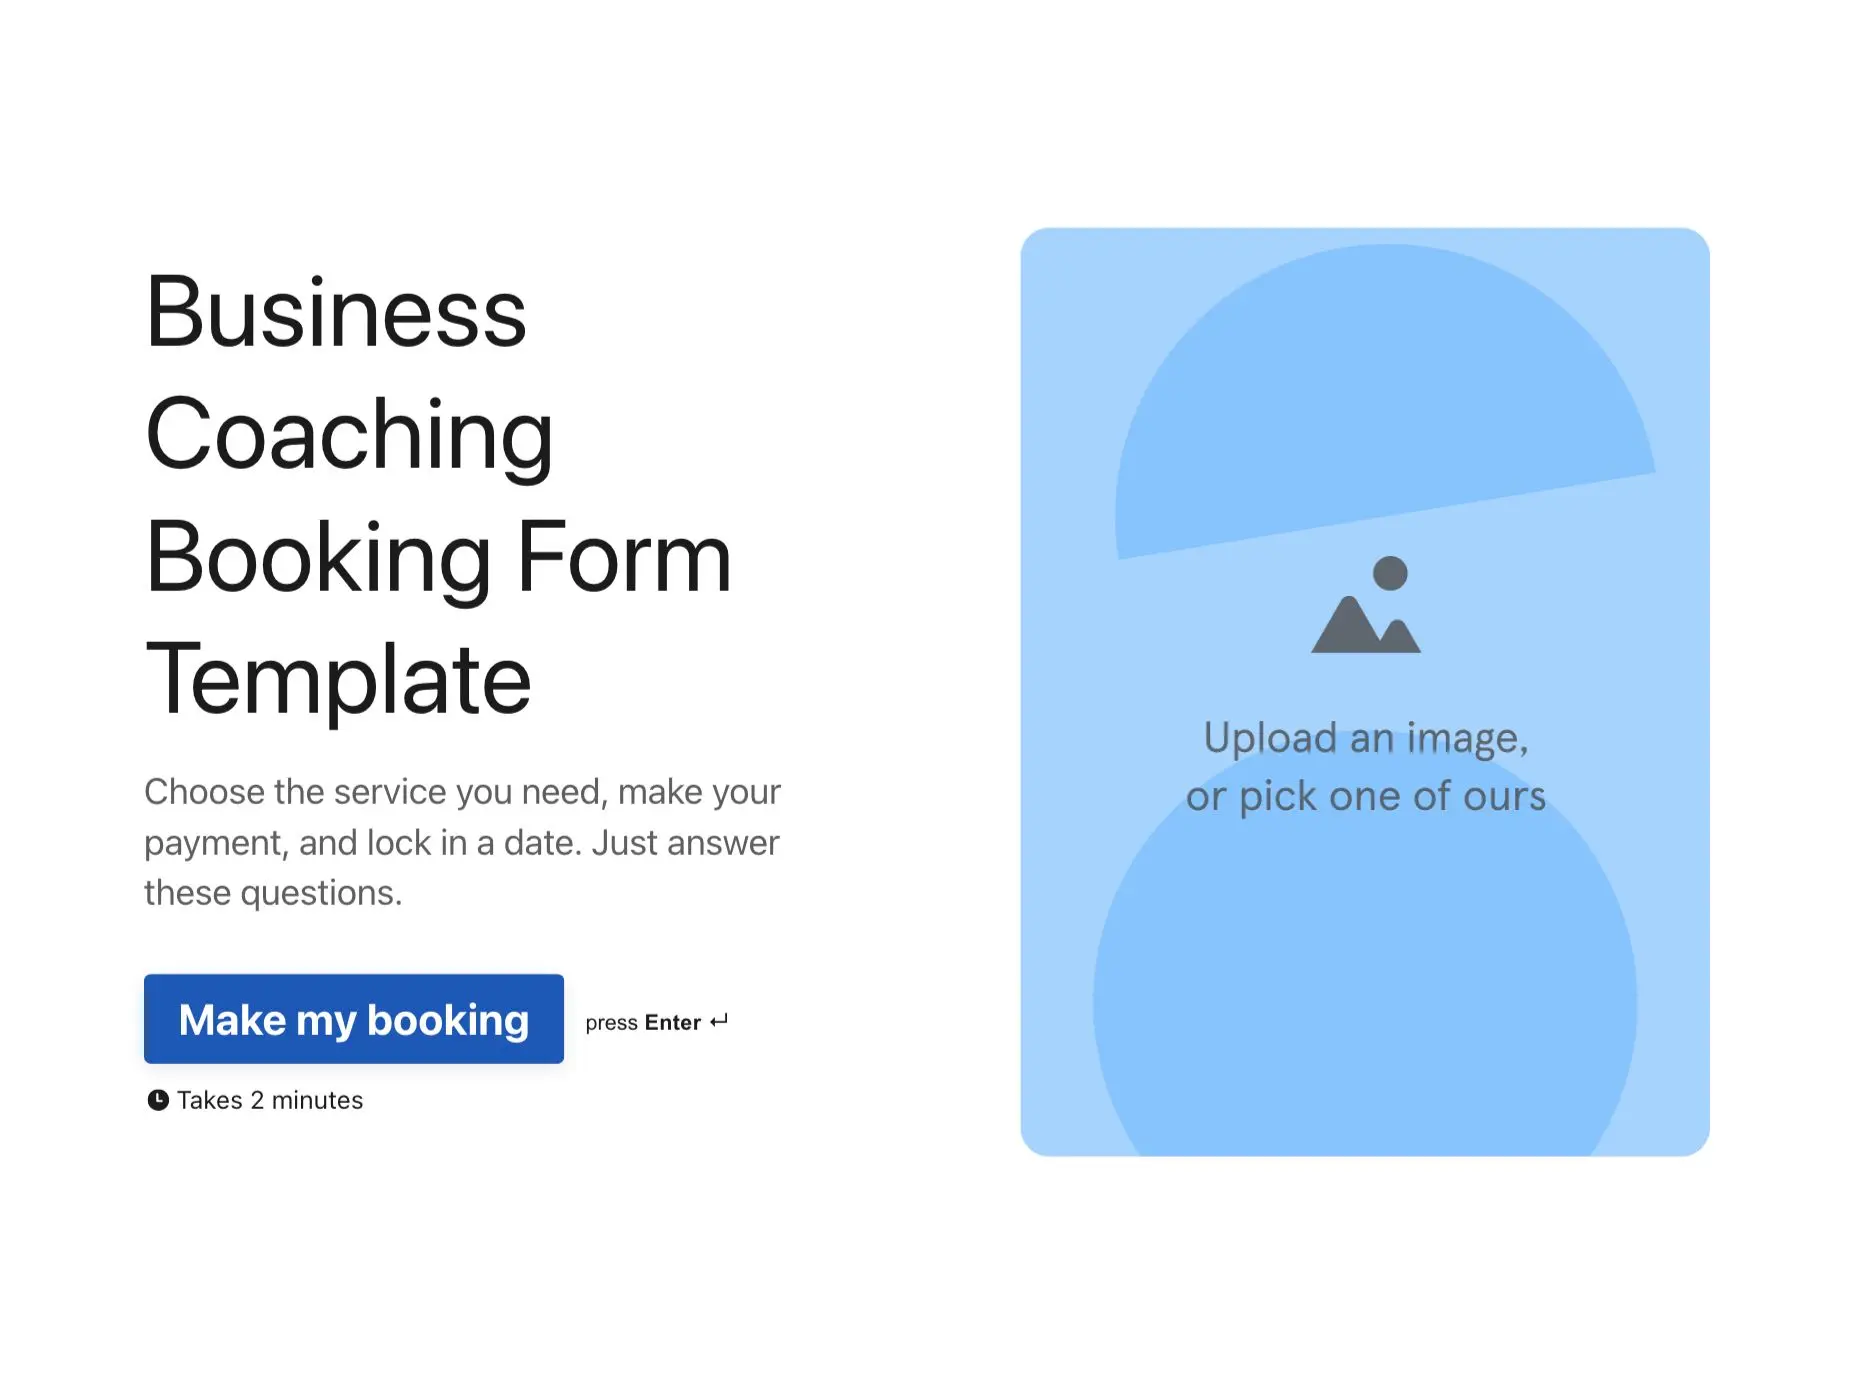 Business Coaching Booking Form Template Hero